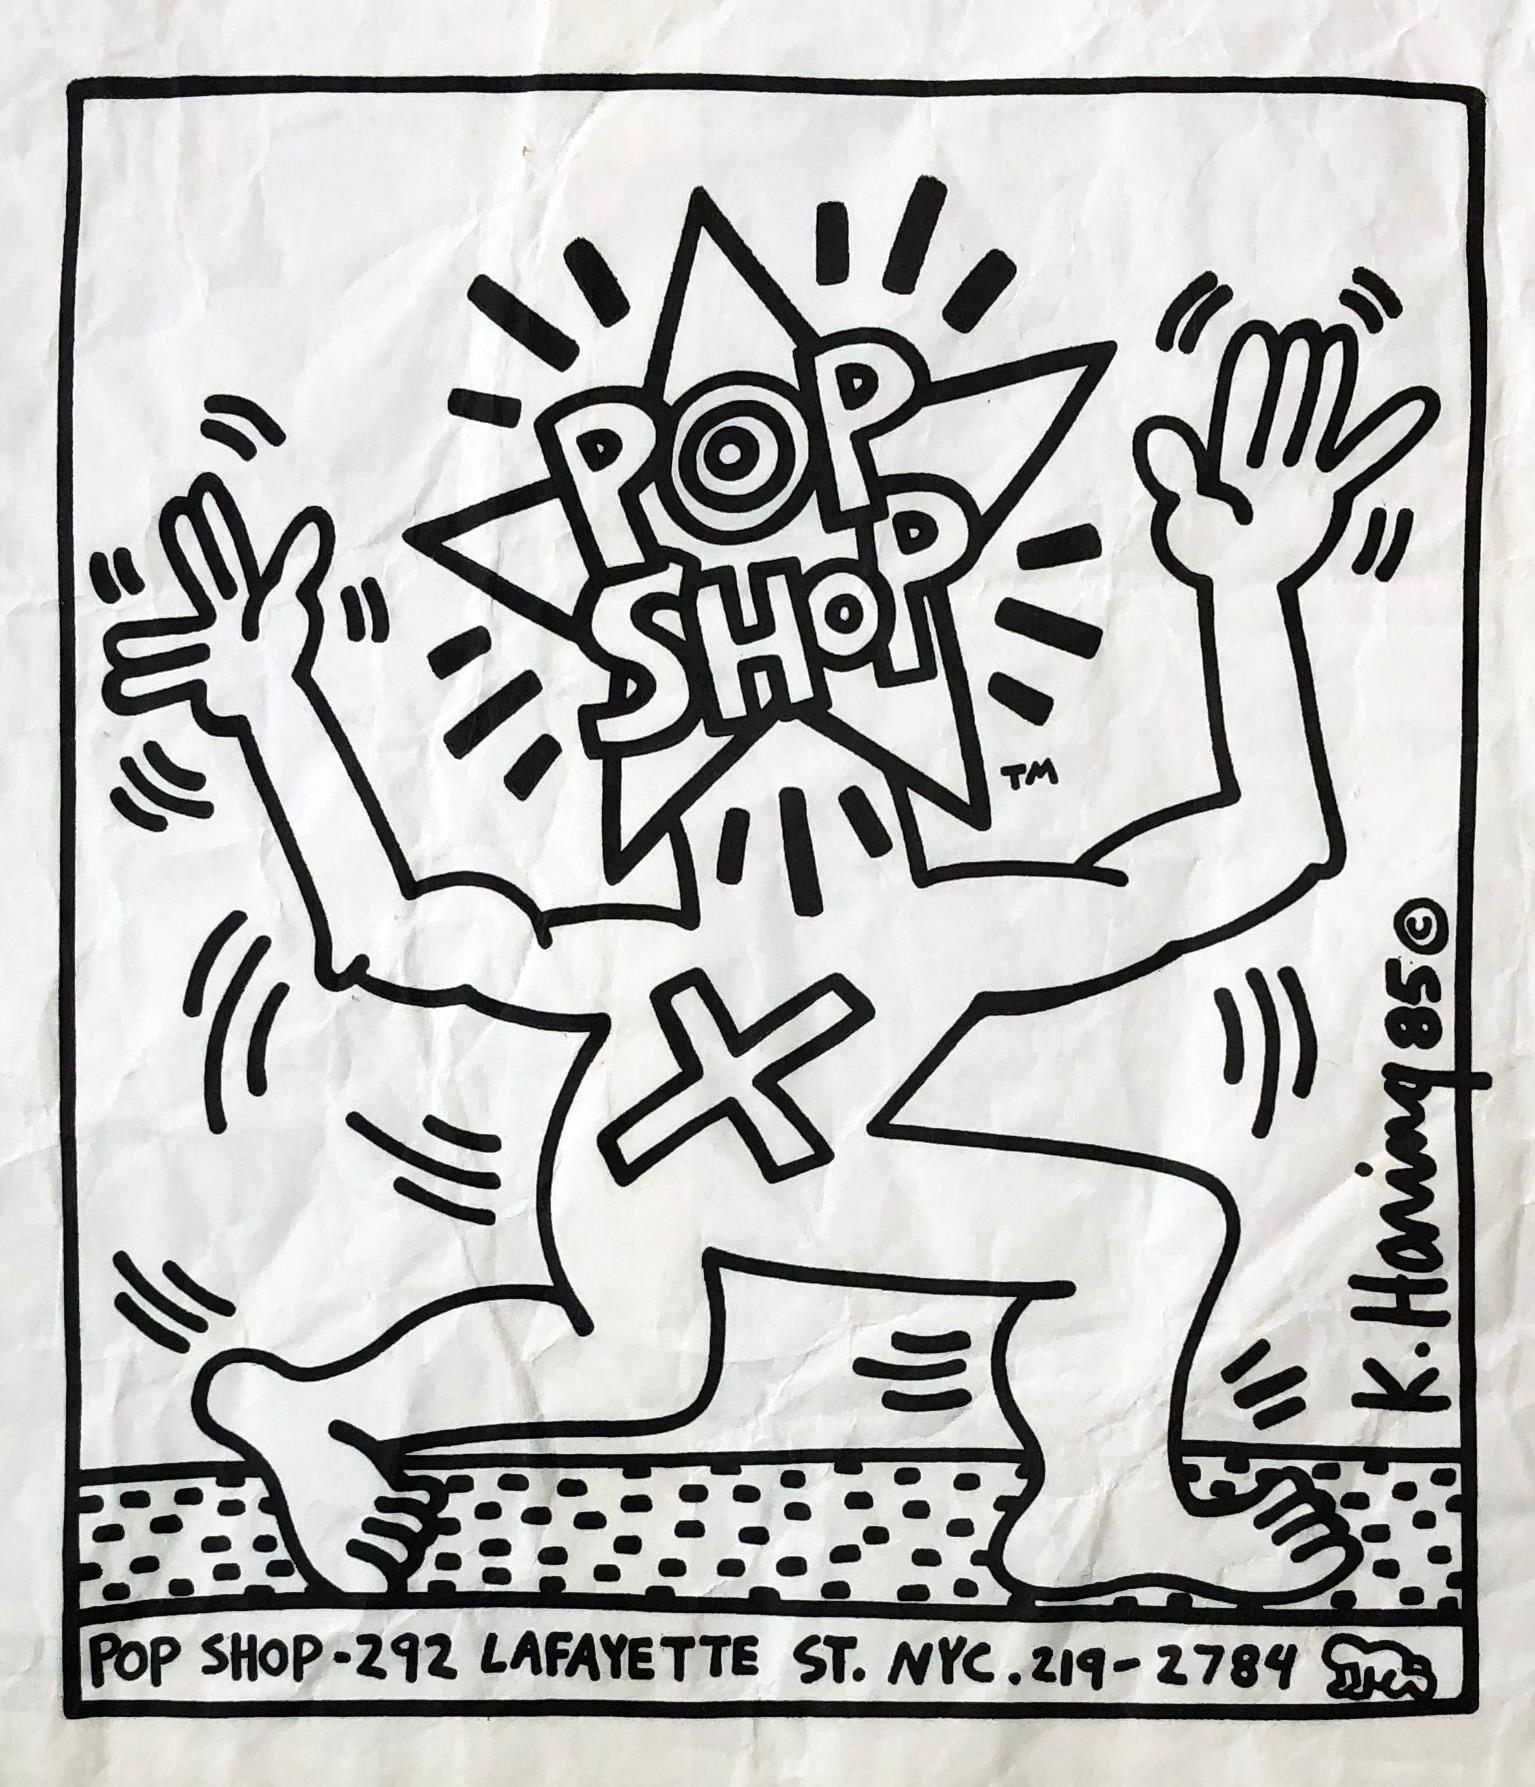 Vintage Keith Haring 1980s Pop Shop bag off-set illustrated by Haring. A classic Haring Pop Shop collectible that is well-suited fro framing. 

Medium: Offset lithograph on whiter paper bag. c.1985. 
Approximately 8.5 x 11 inches. 
Far condition;